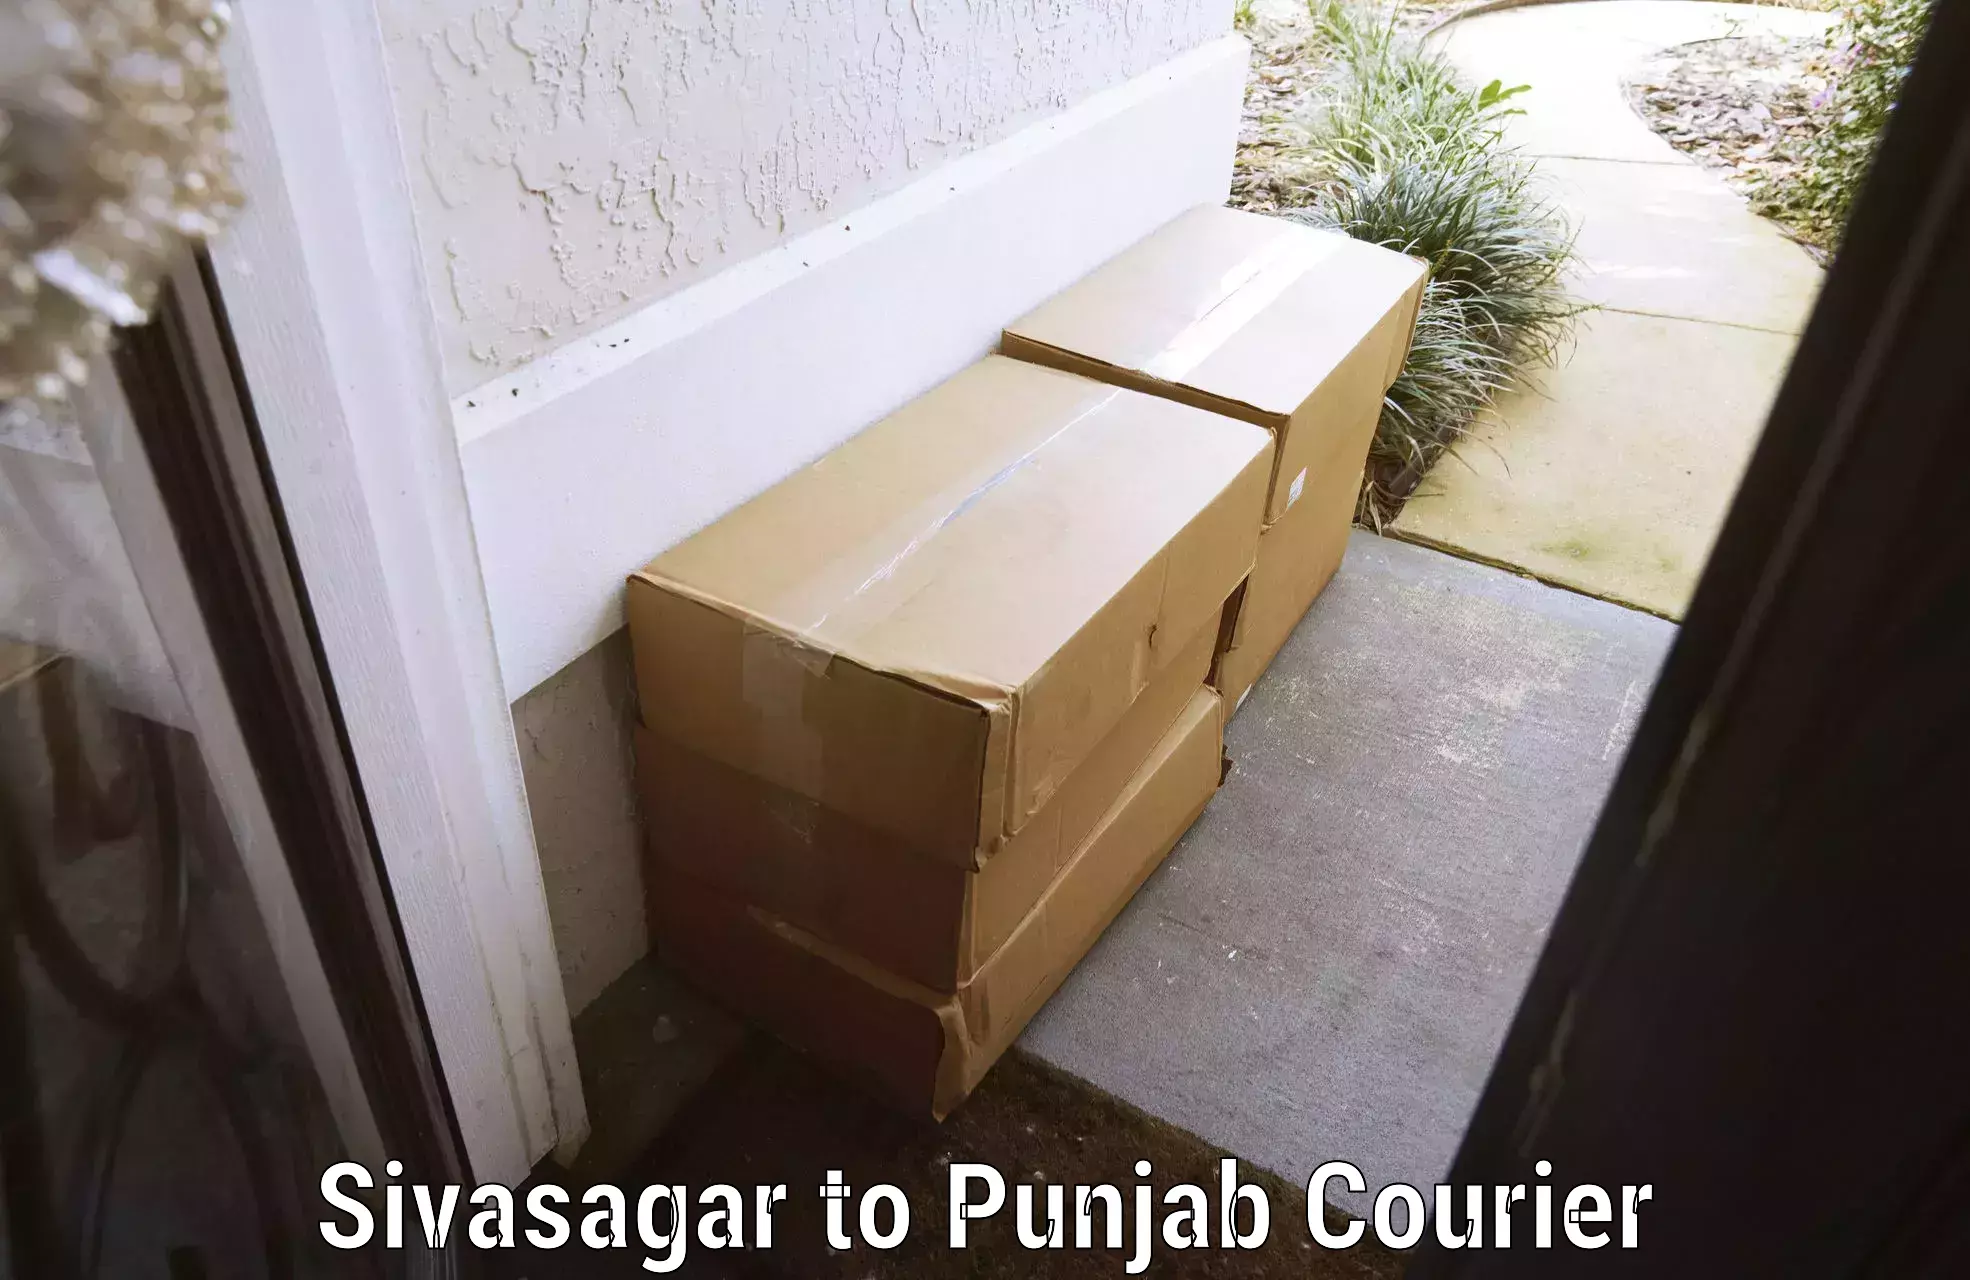 Instant baggage transport quote Sivasagar to Pathankot